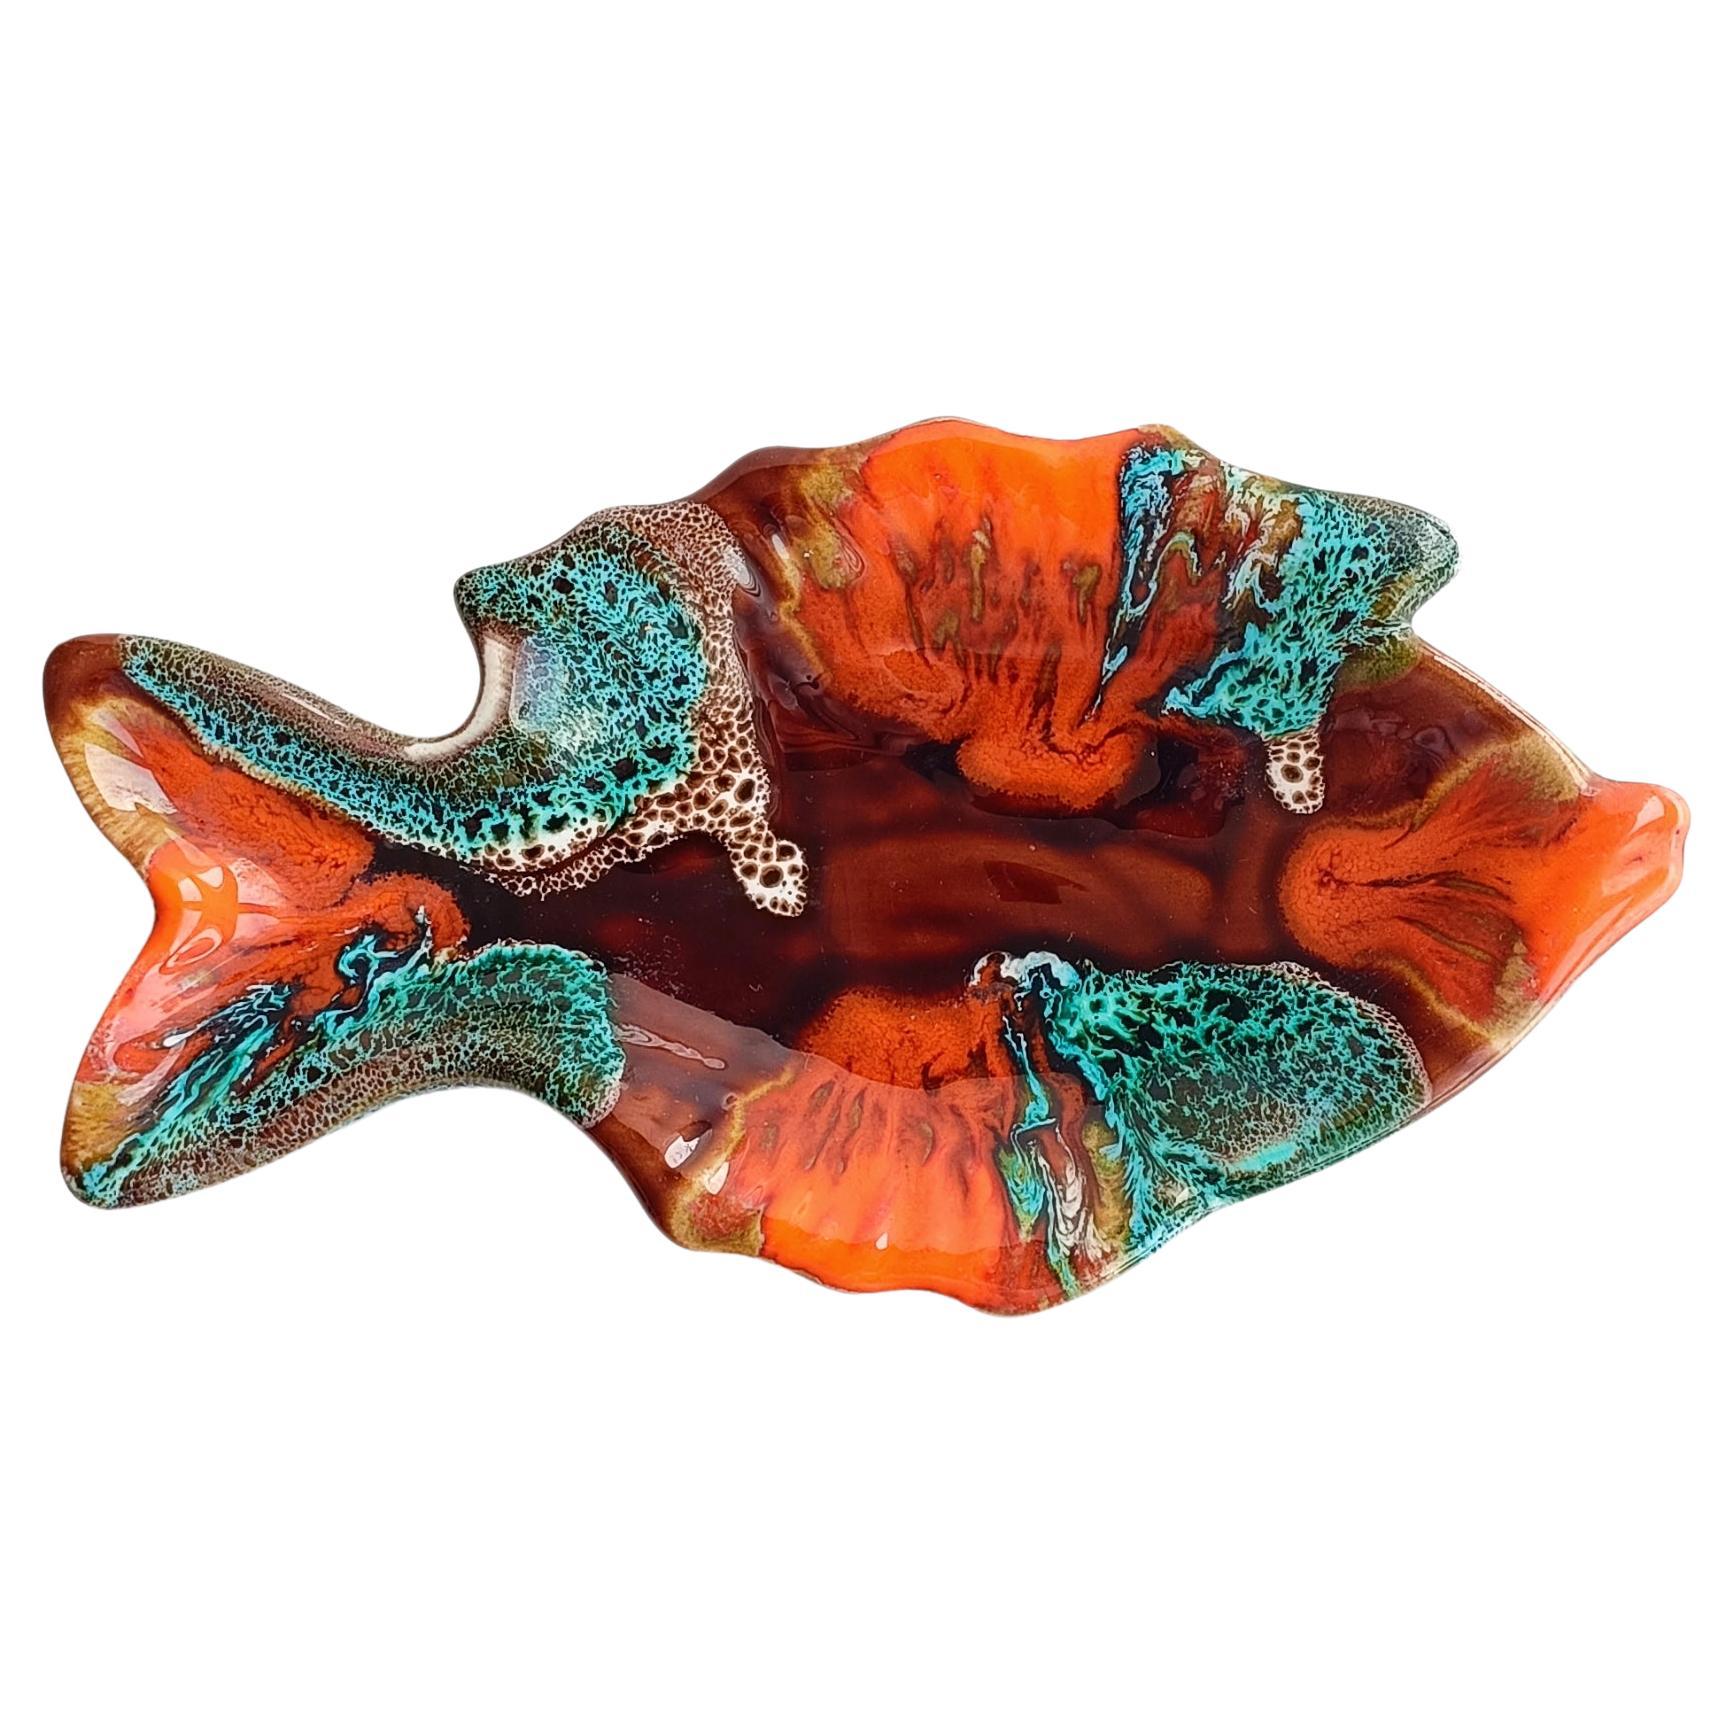 20th Century Vintage French Vallauris Signed Fat Lava Ceramic Fish Sculpture-Trays, 1950s For Sale